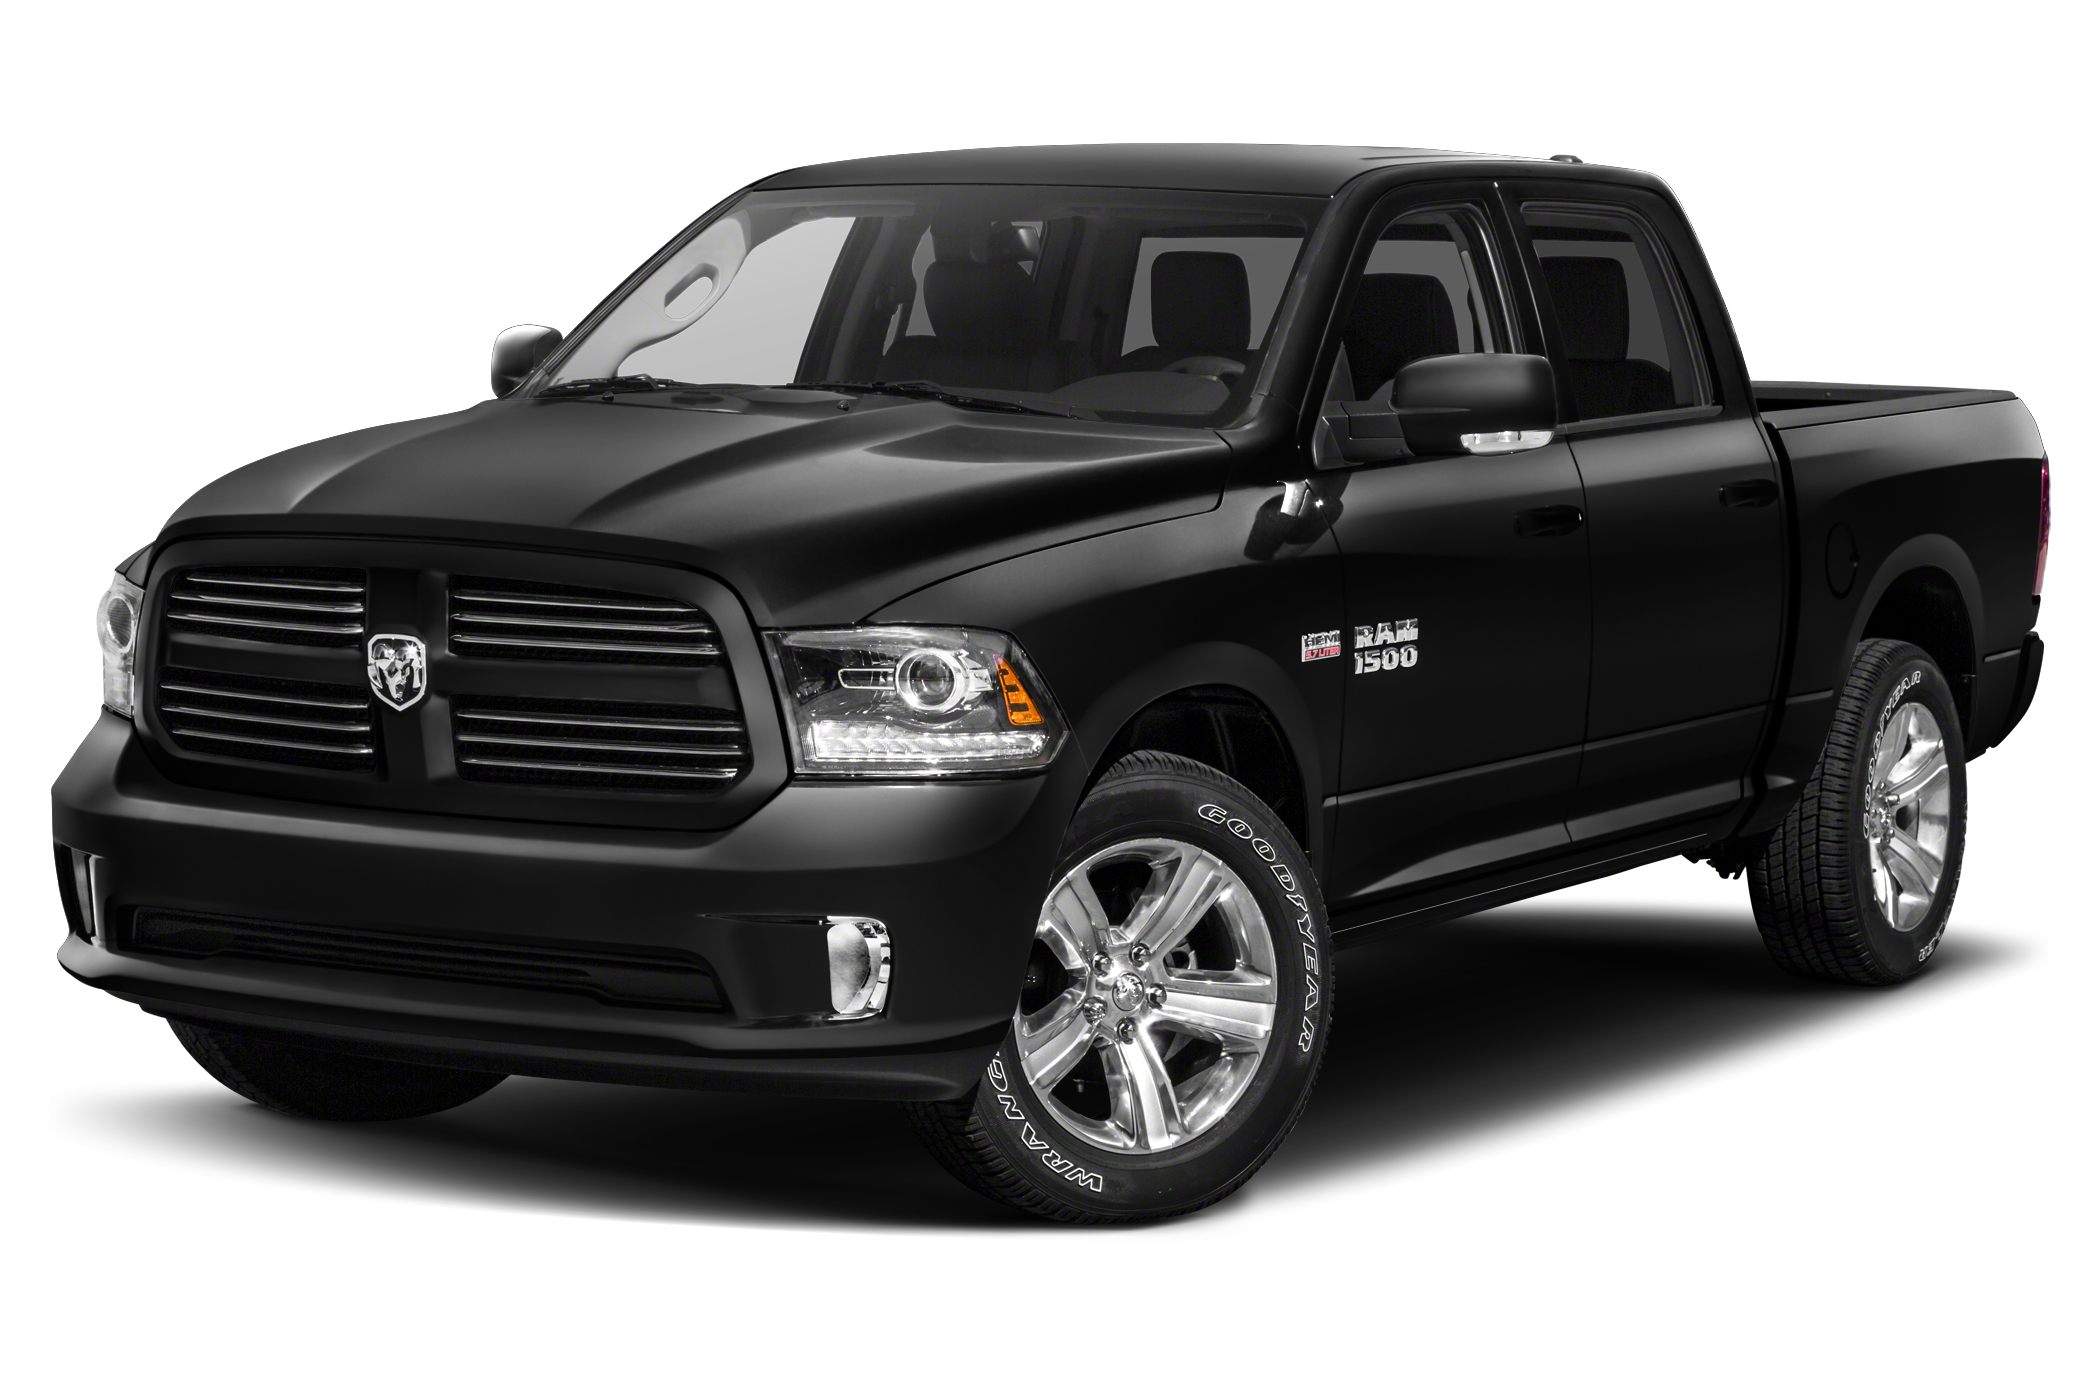 2015 Ram 1500 oem parts and accessories on sale